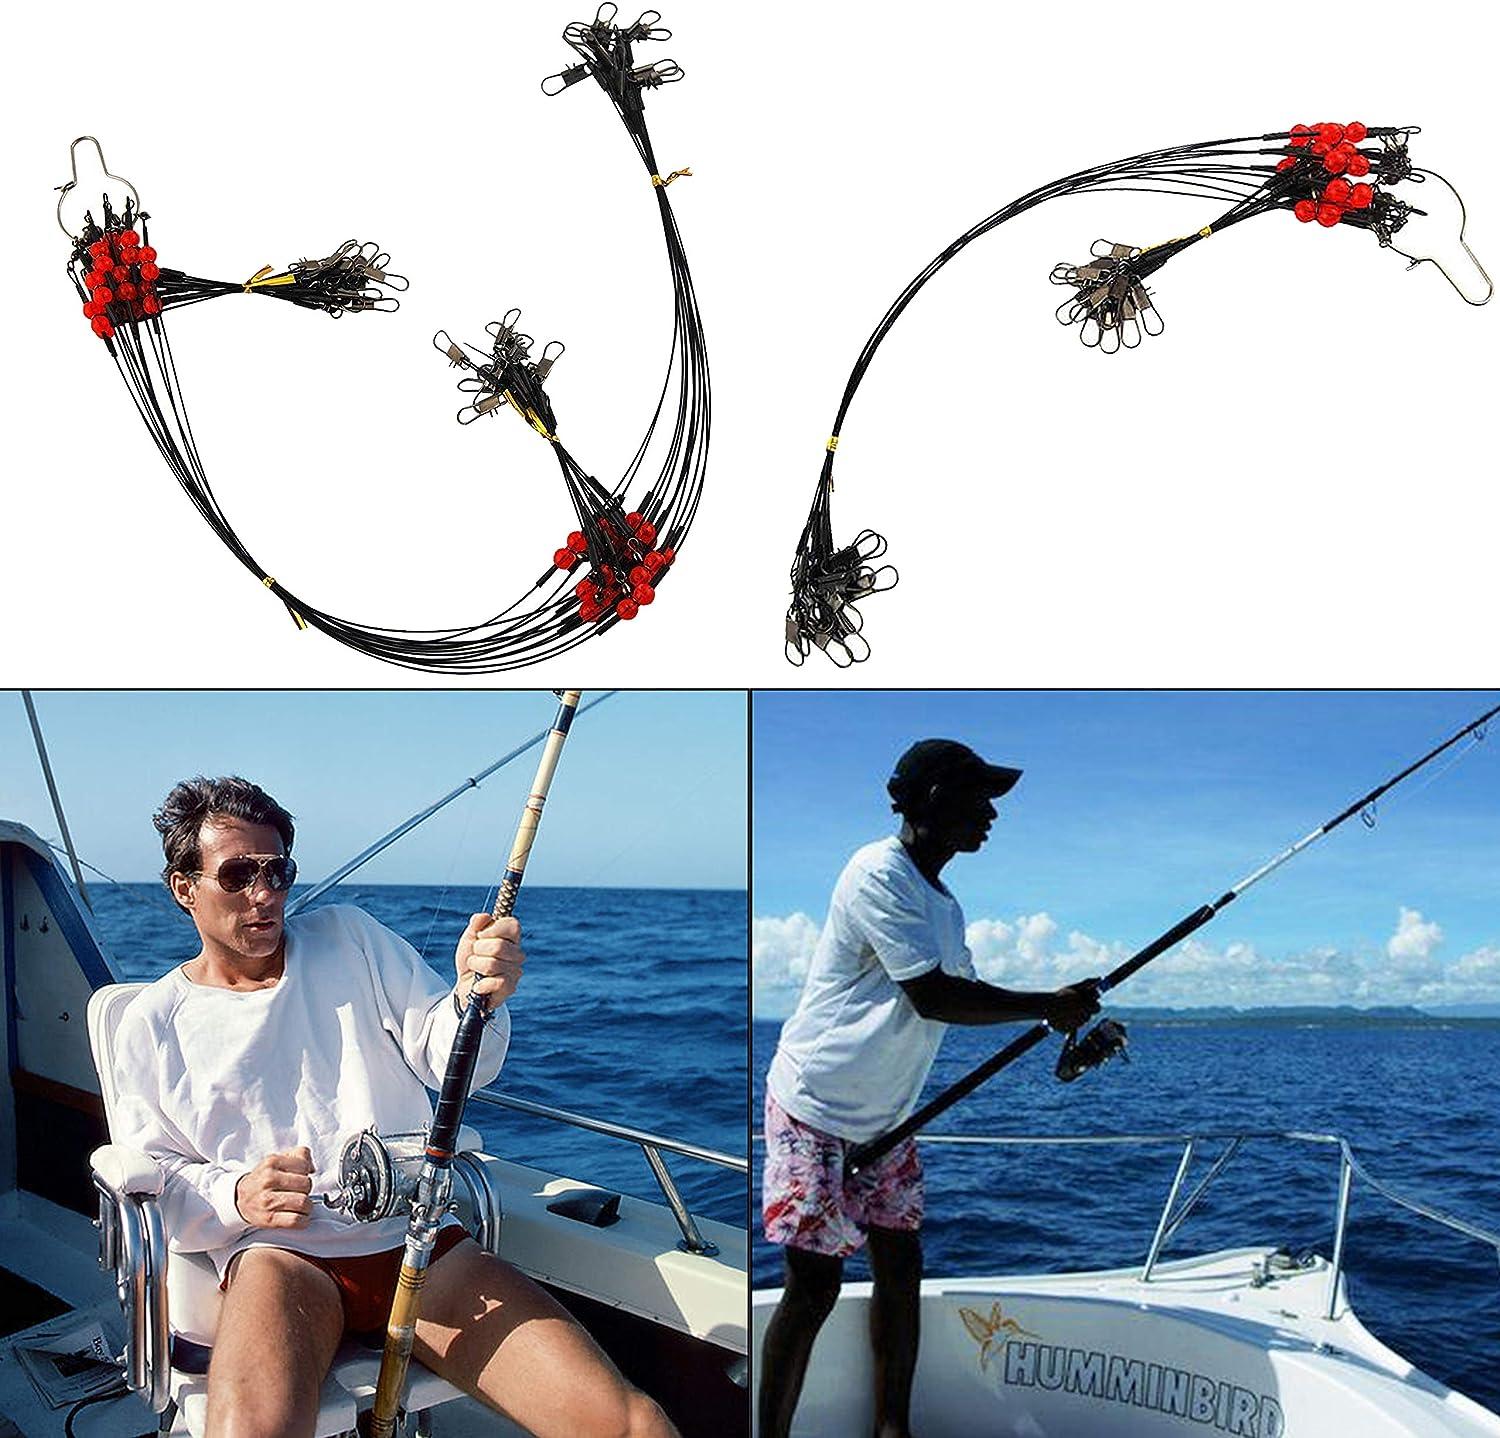 Fishing Leader Saltwater Fishing Rigs Fishing Bottom Rigs High Strength Surf  Fishing Rigs Steel Leaders Wire Fishing Wire Rig Fishing Leaders with  Swivel Snaps Beads 1Arm / 2Arm with 1 Arm _ 12pcs